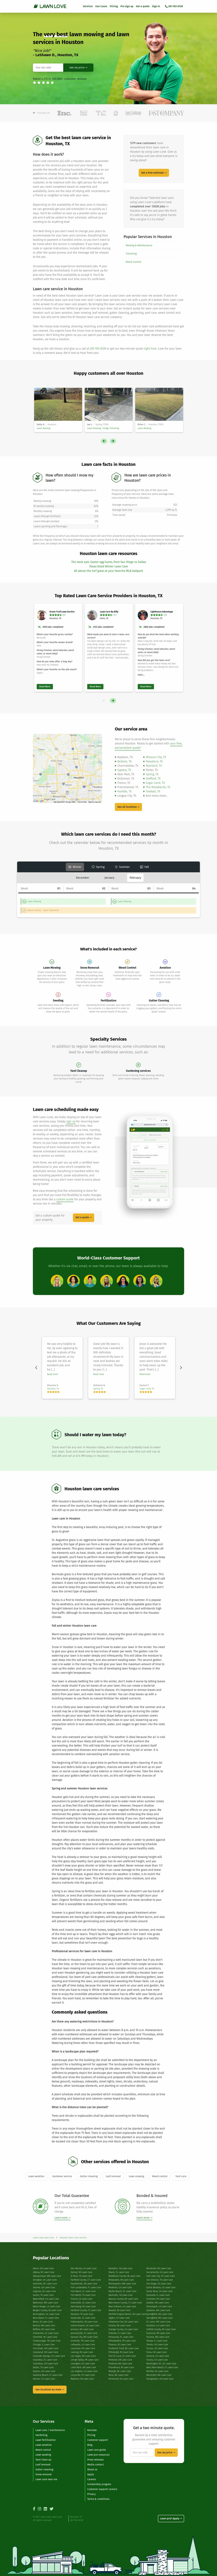 Landing Page Template for Lawn Care - lawnlove.com